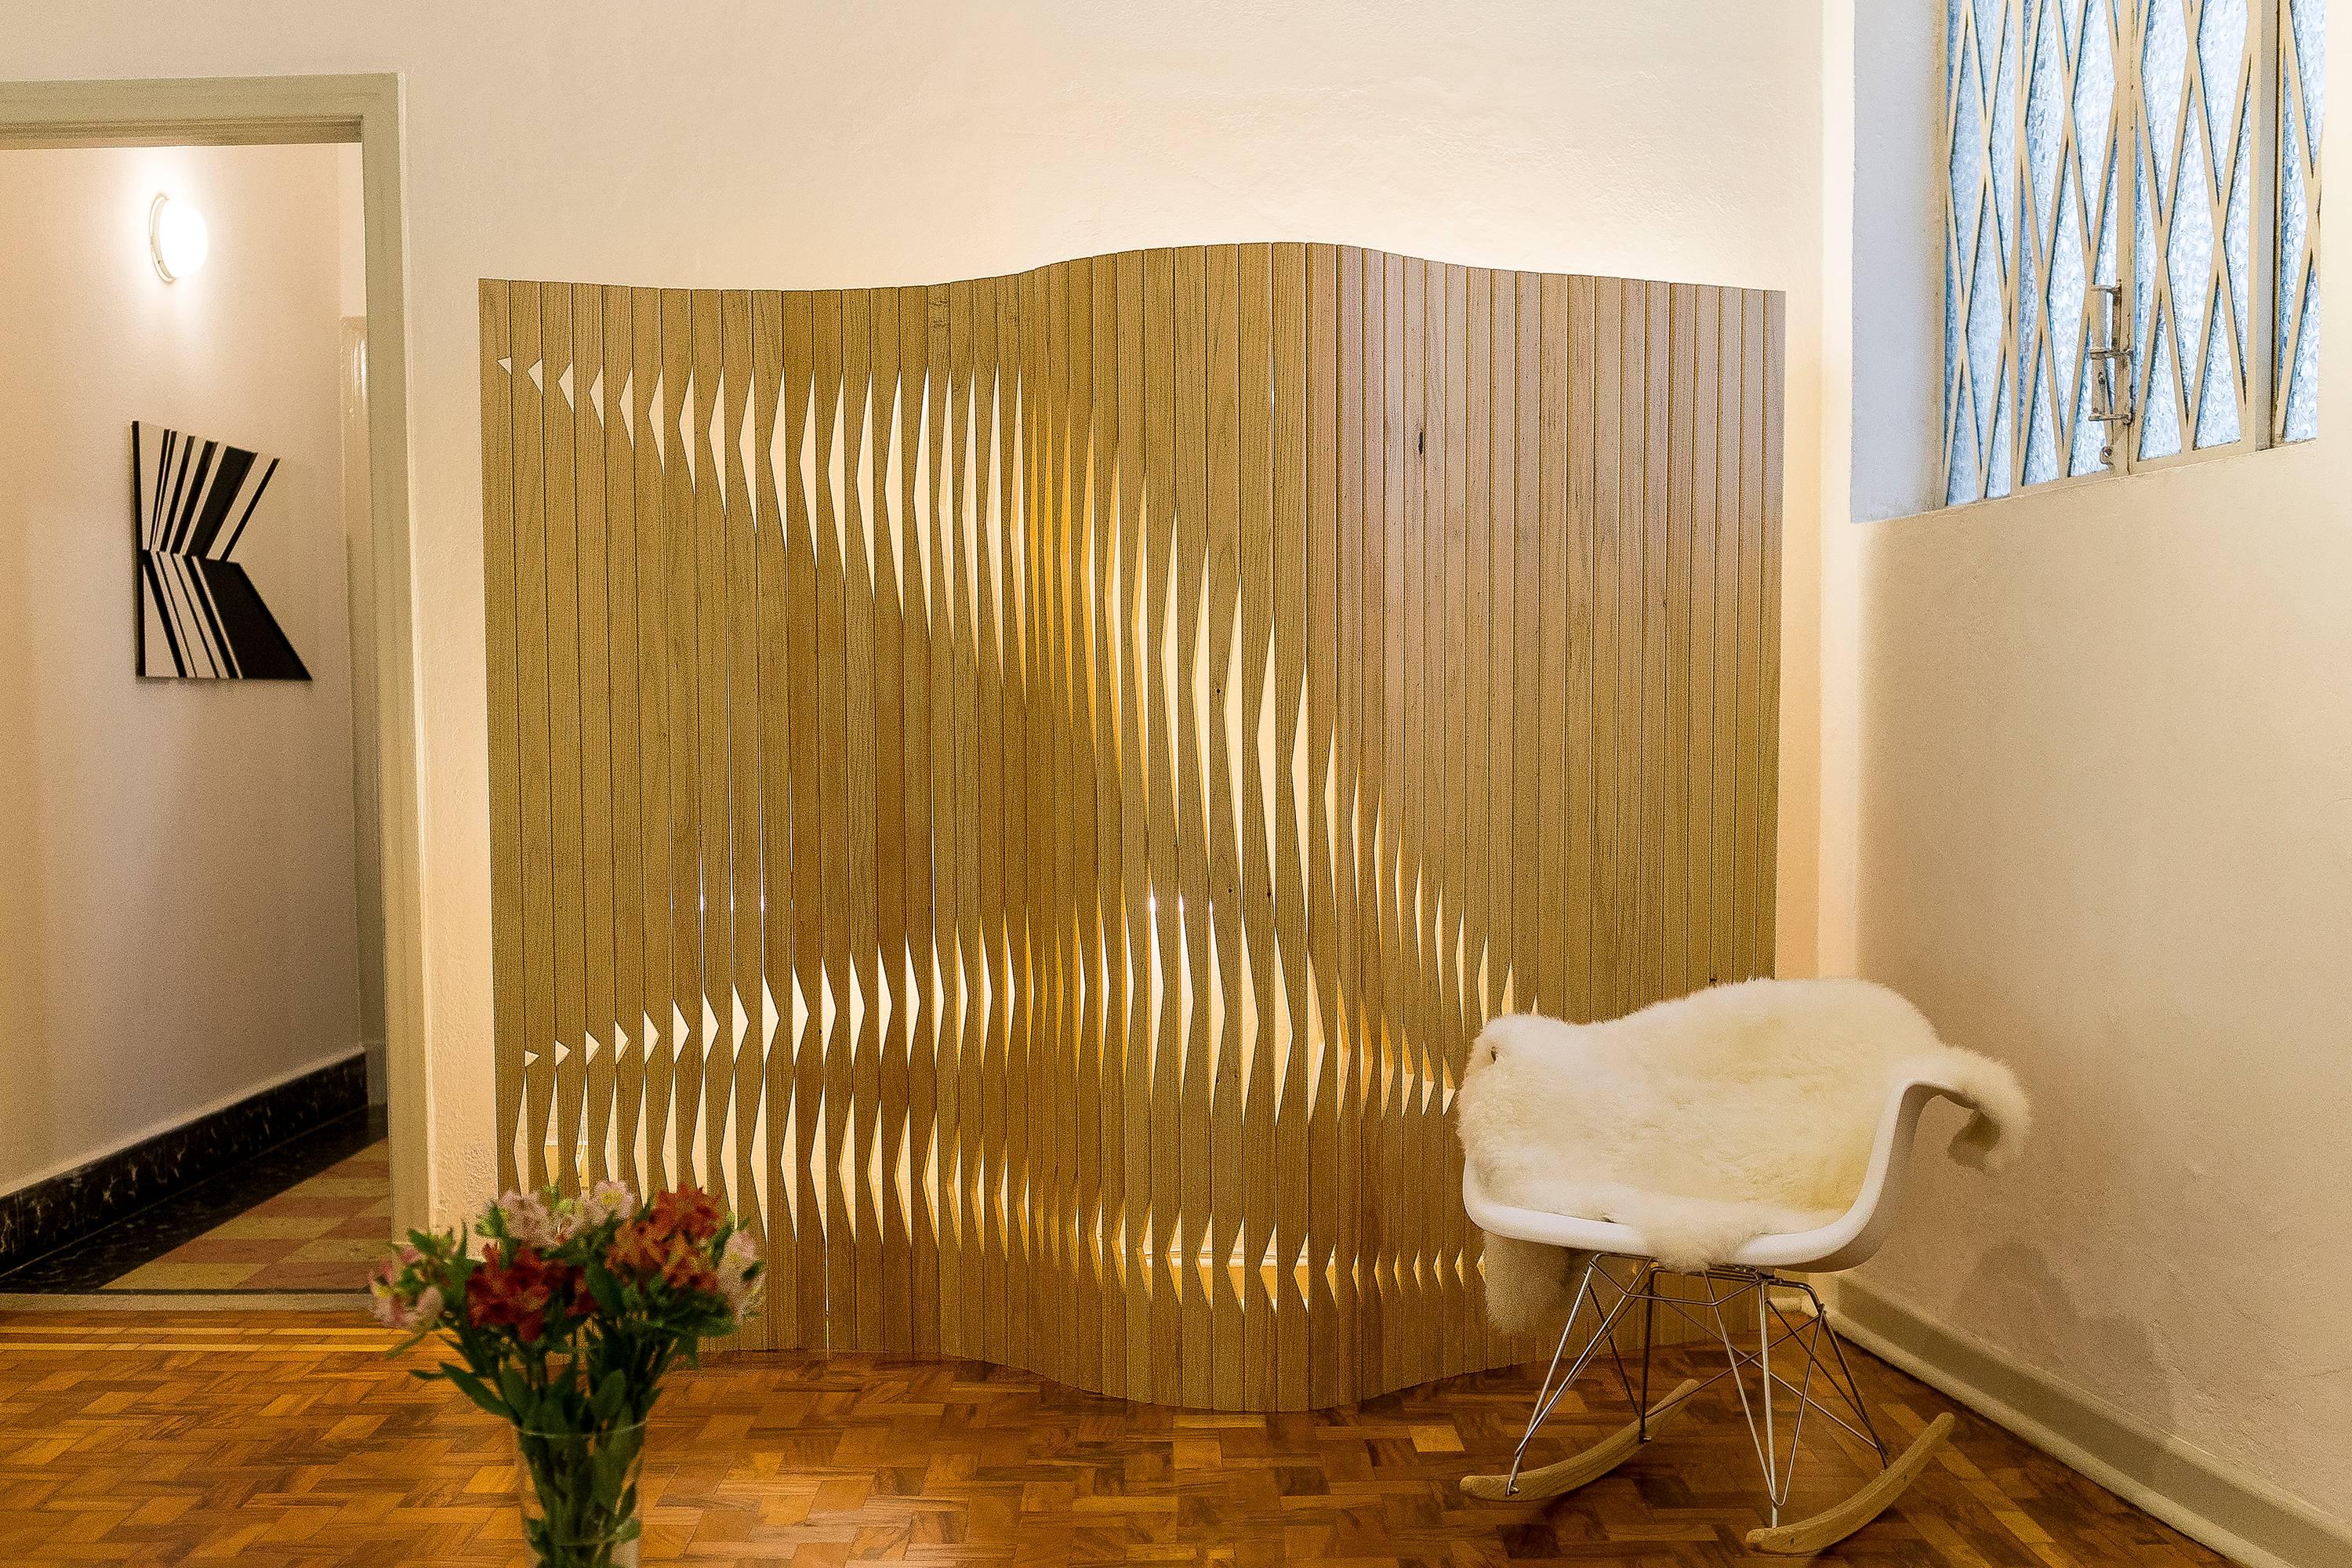 The 'V.az' is a wooden partition screen that transmits the idea of fluidity. Due to its soft openings and the idea of movement these openings transmit, it is a poetic and interactive furniture piece. It was designed on computer and inspired on